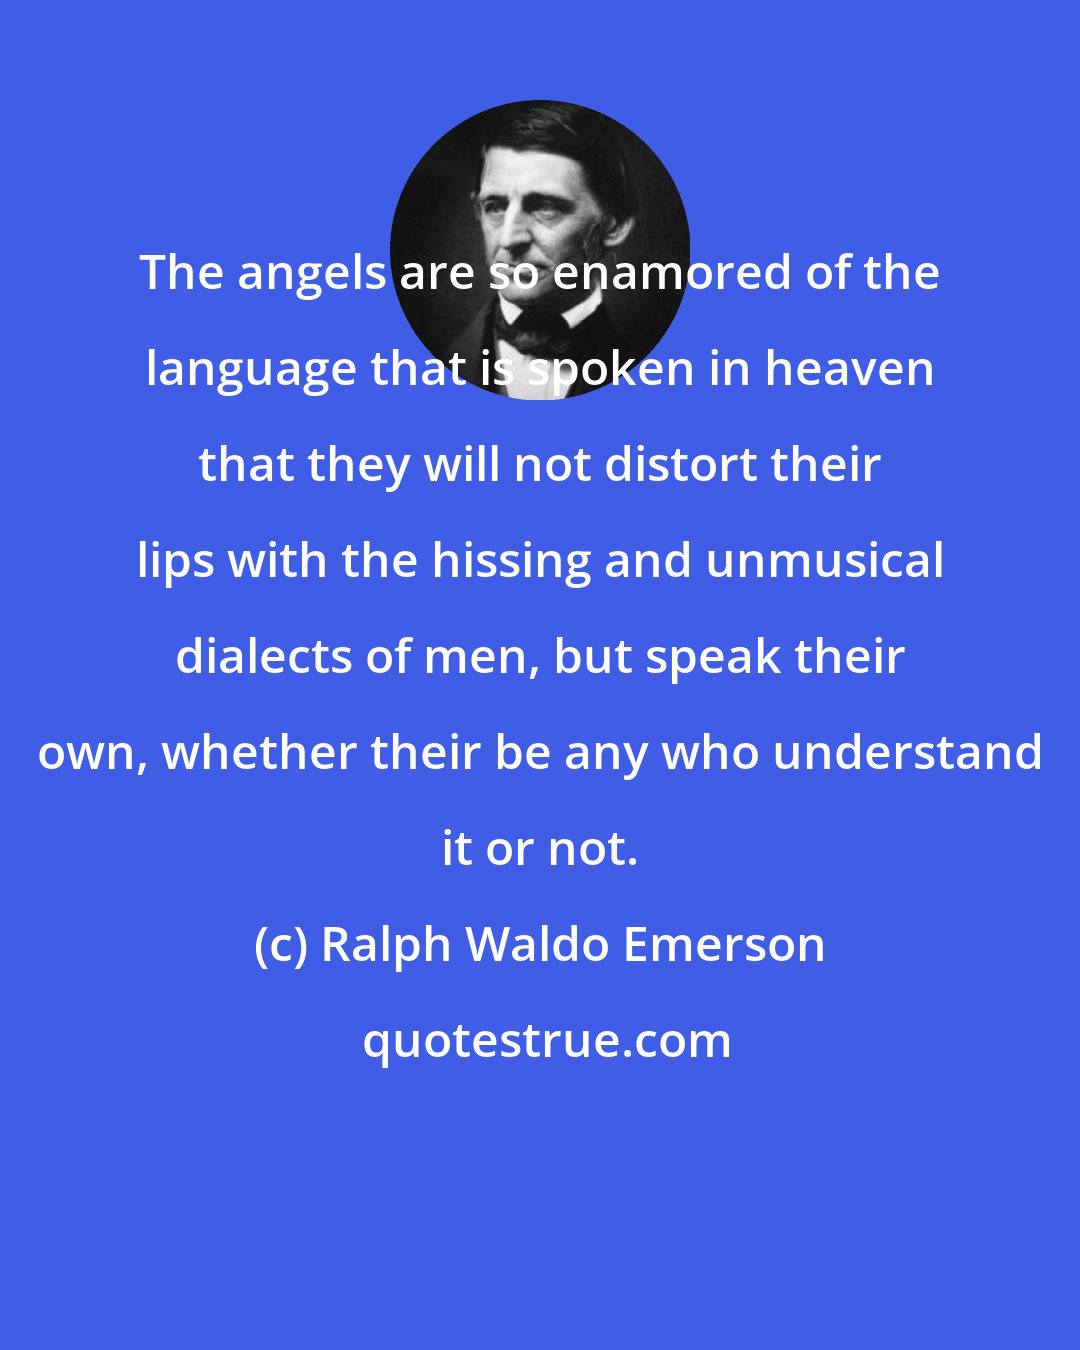 Ralph Waldo Emerson: The angels are so enamored of the language that is spoken in heaven that they will not distort their lips with the hissing and unmusical dialects of men, but speak their own, whether their be any who understand it or not.